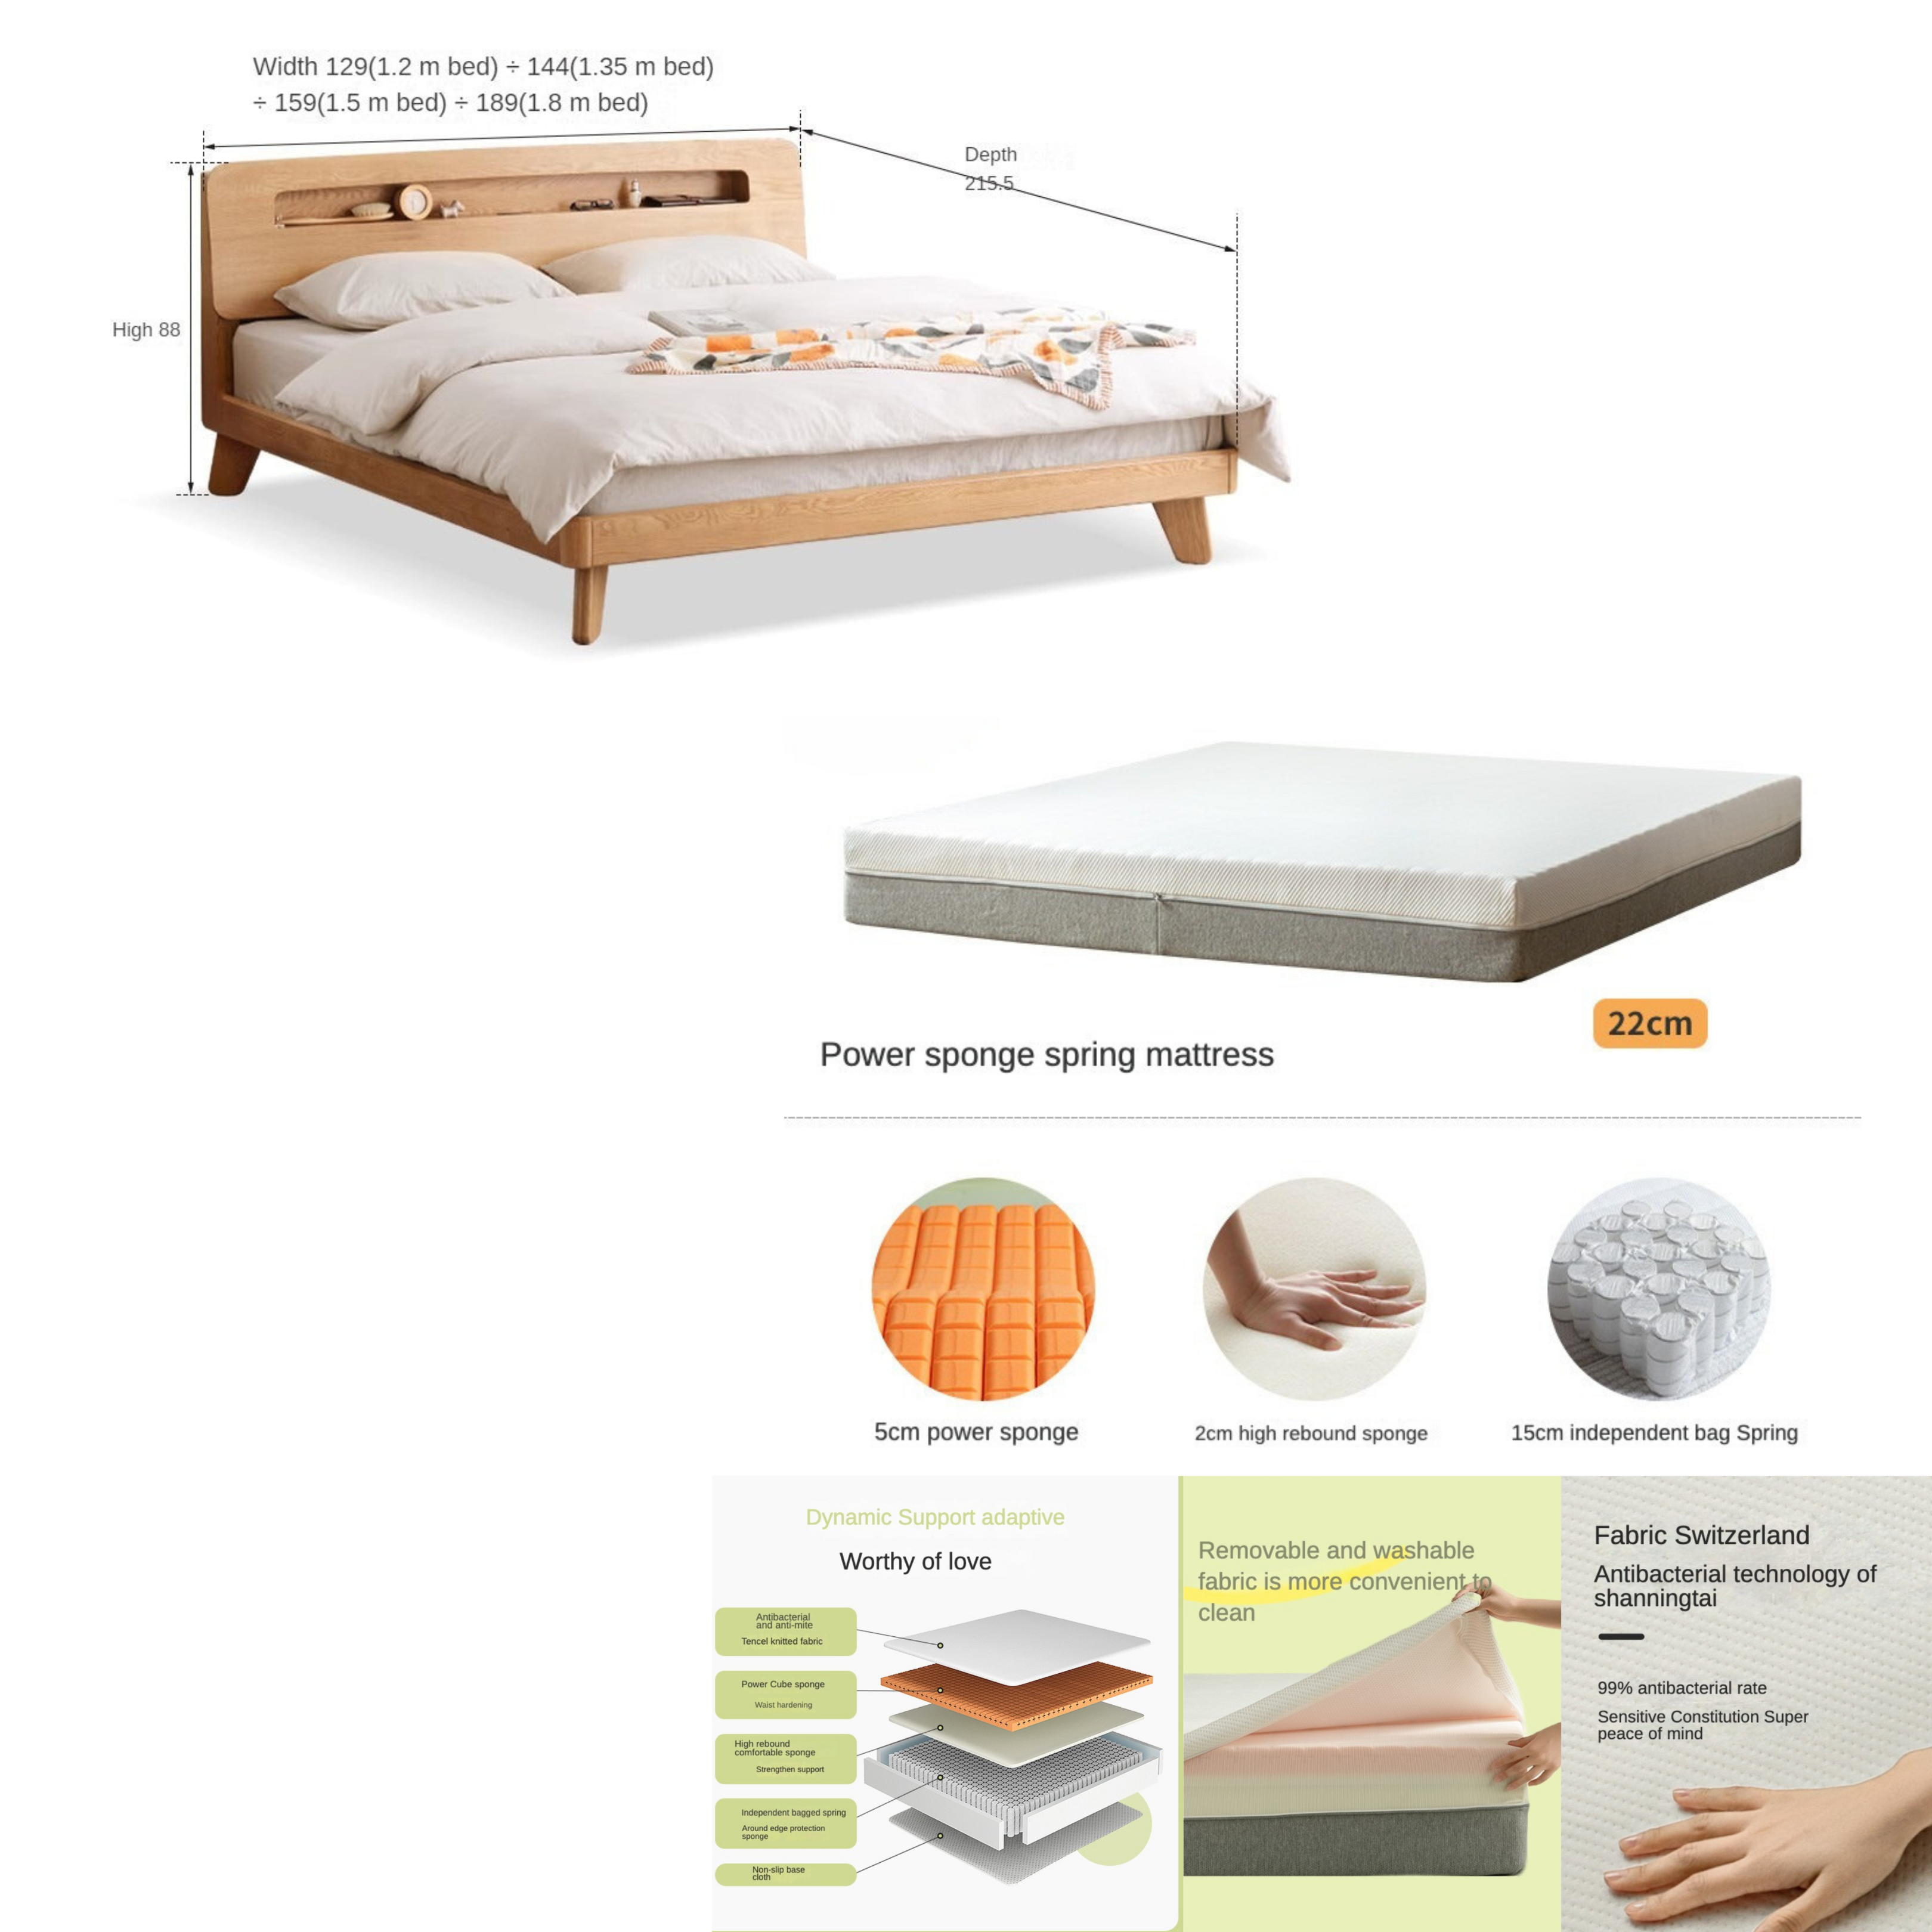 Oak solid wood bed Touch-type LED warm light_)